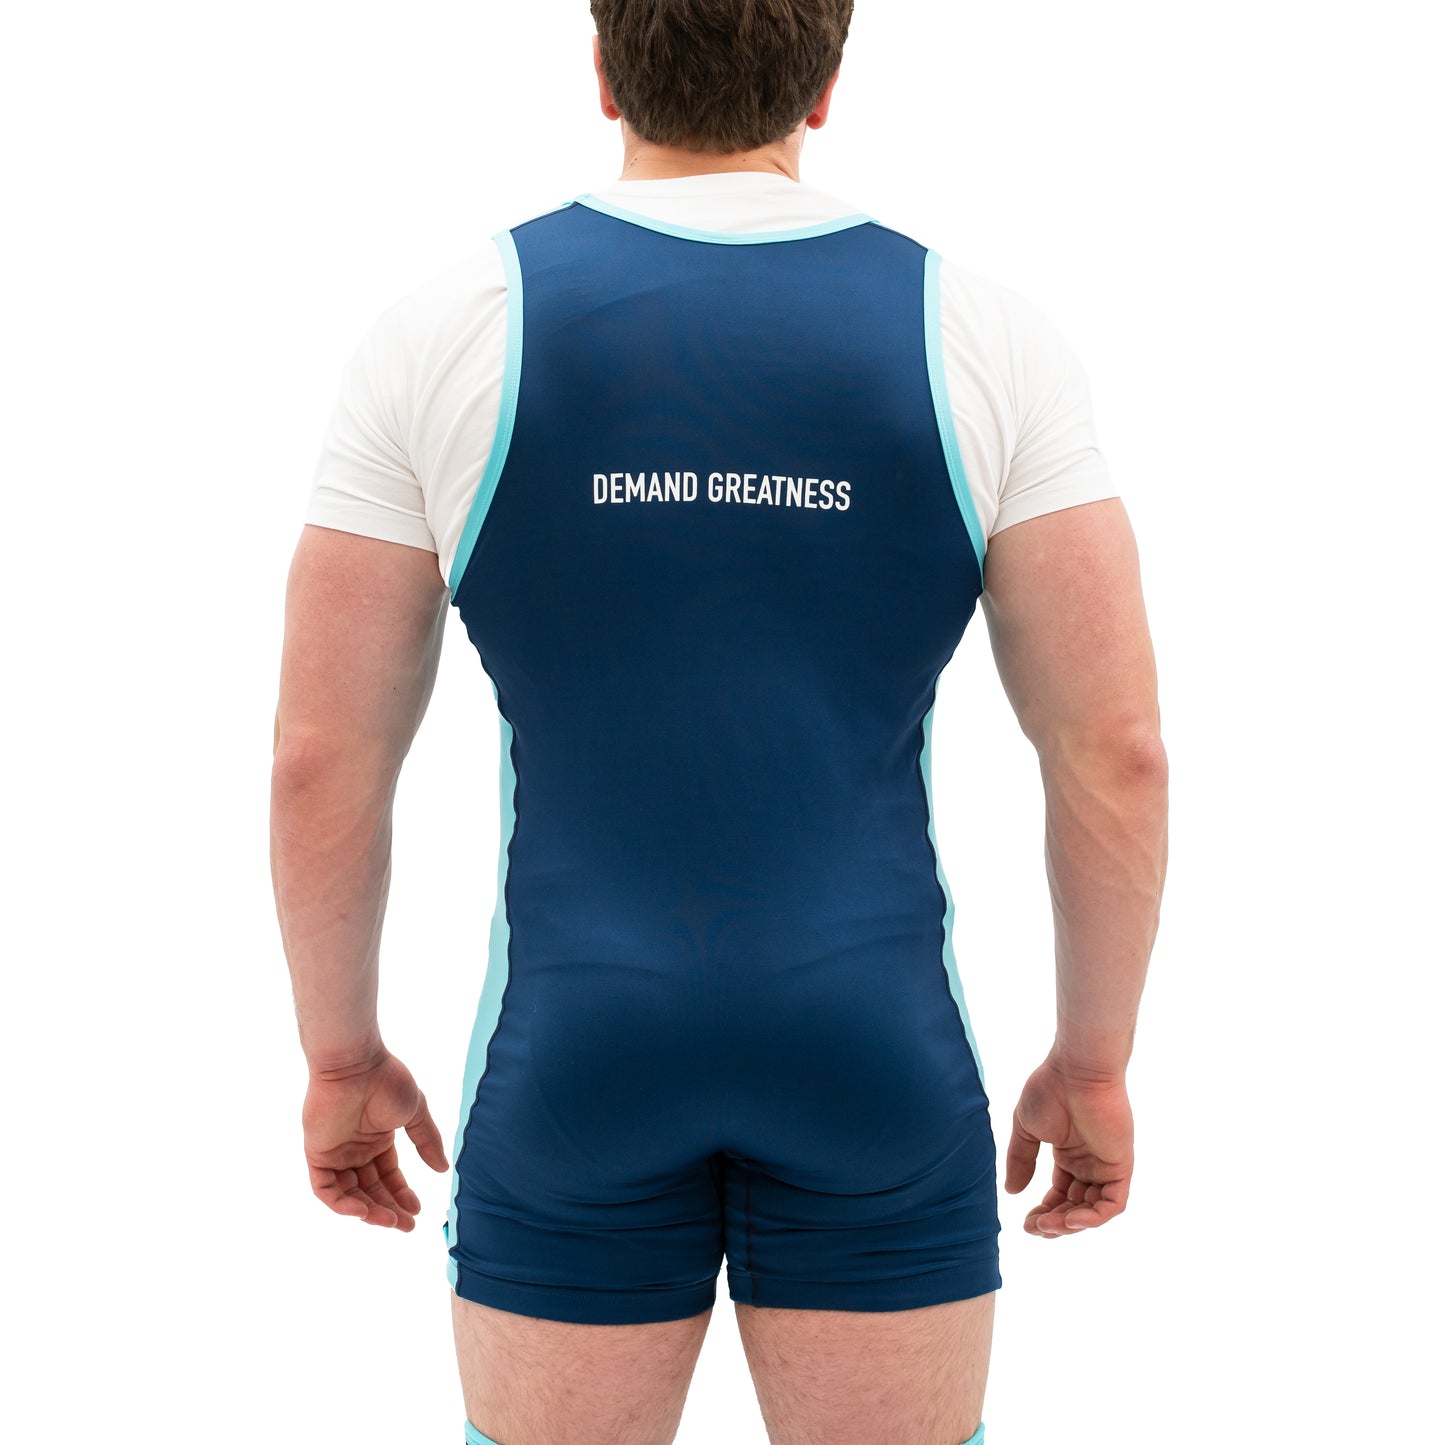 
                  
                    A7 Singlet - Iced - IPF Approved
                  
                